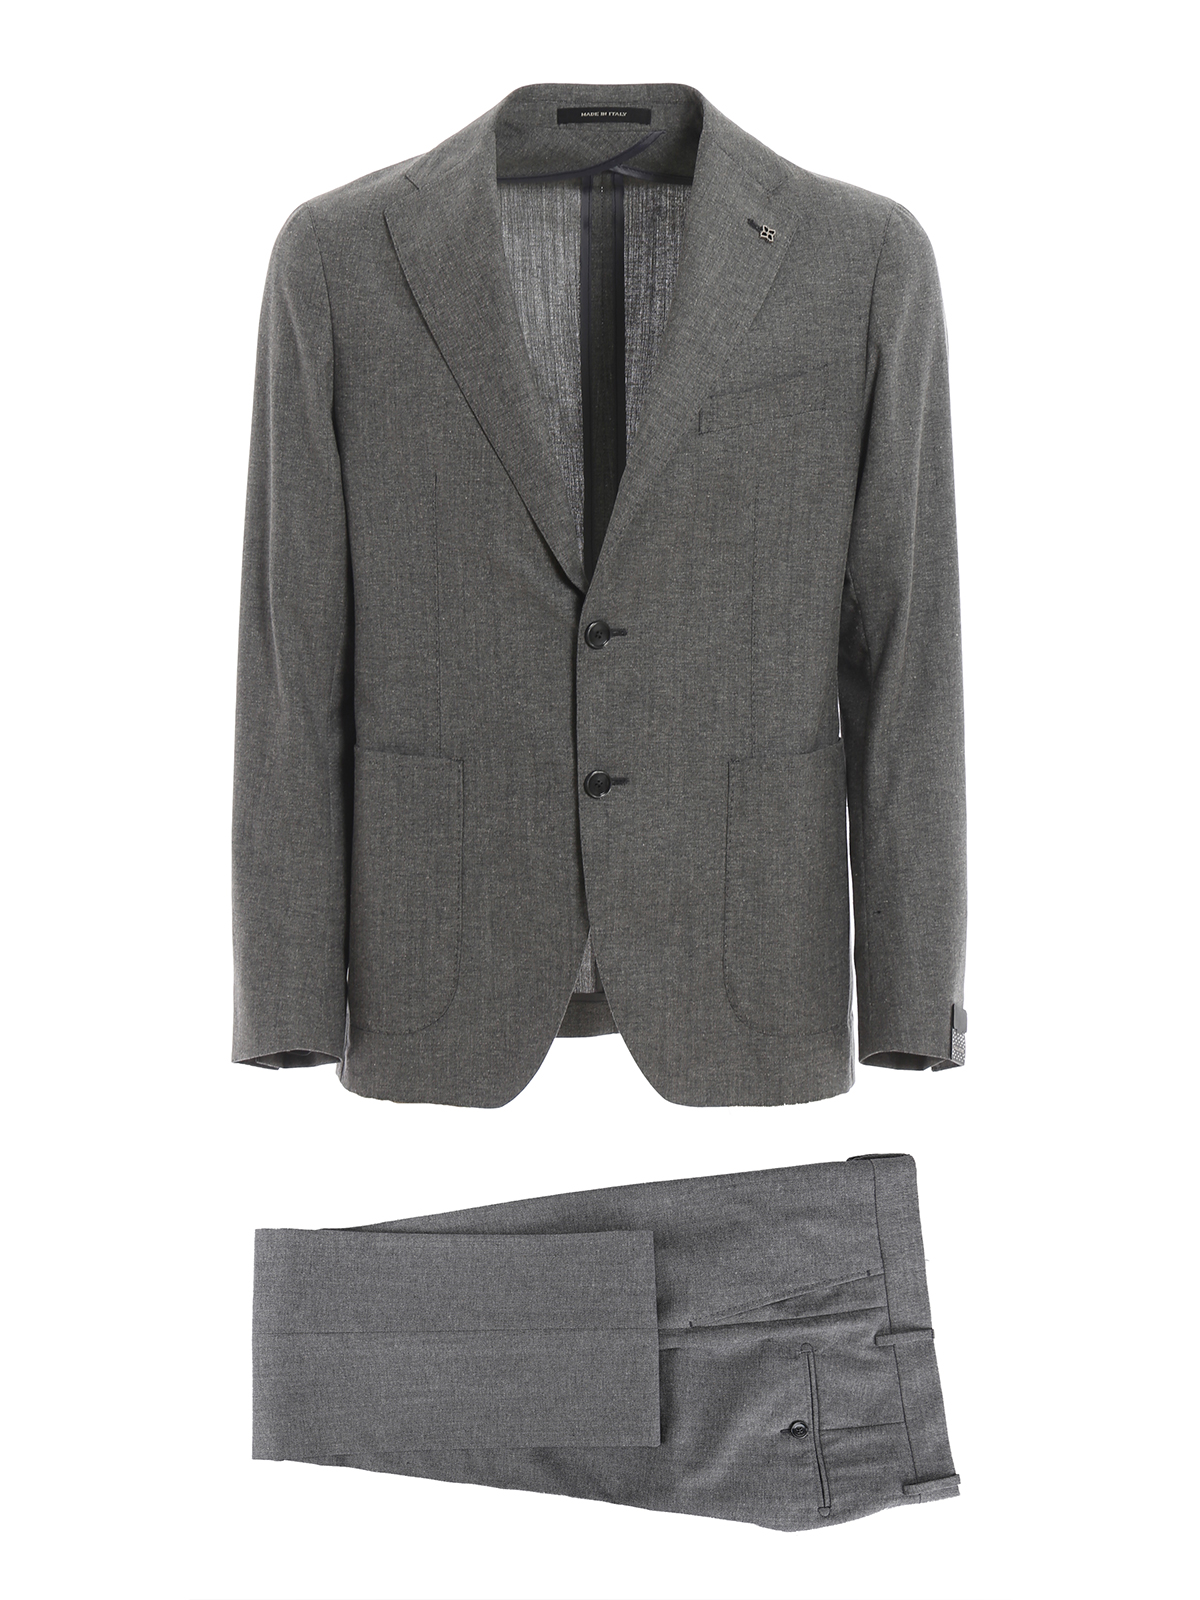 Tagliatore - Grey wool and cotton two-piece suit - formal suits ...